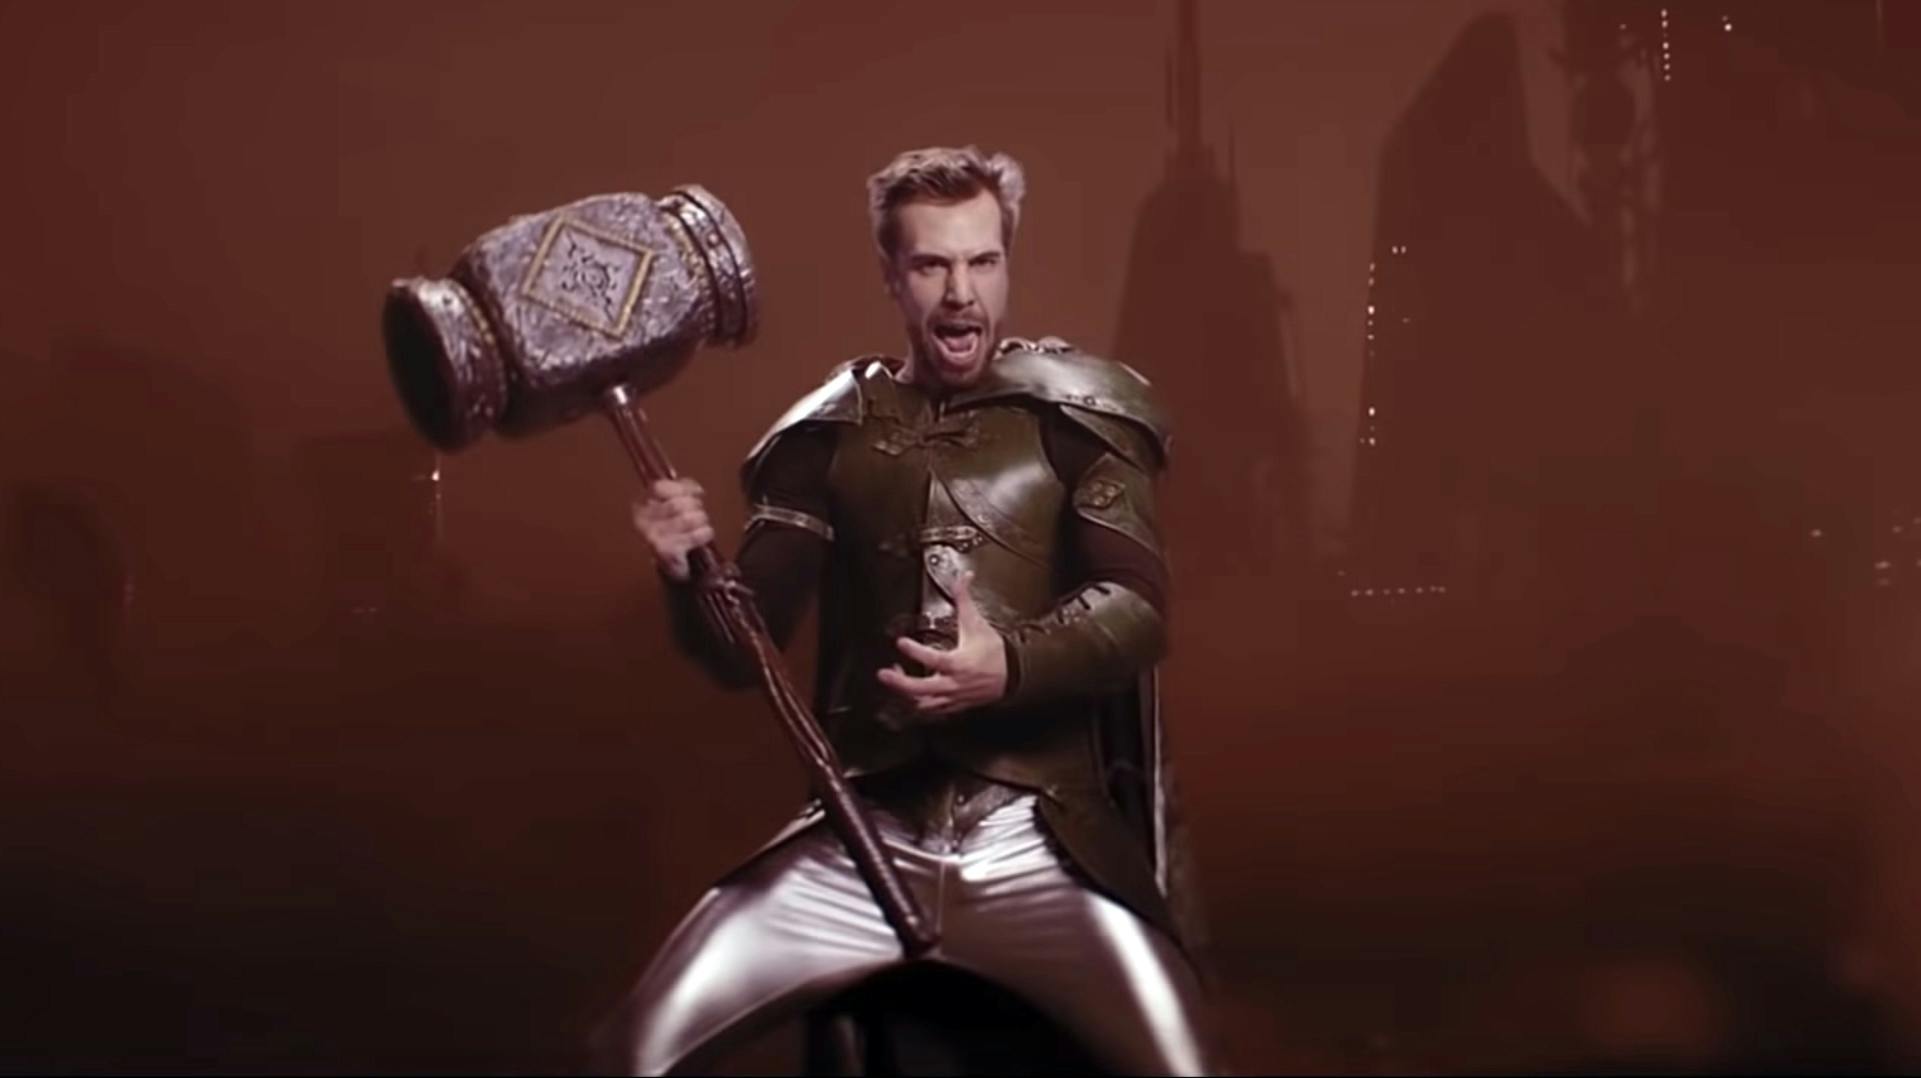 Watch The New Gloryhammer Video For The Song Gloryhammer, About Their Gloryhammer